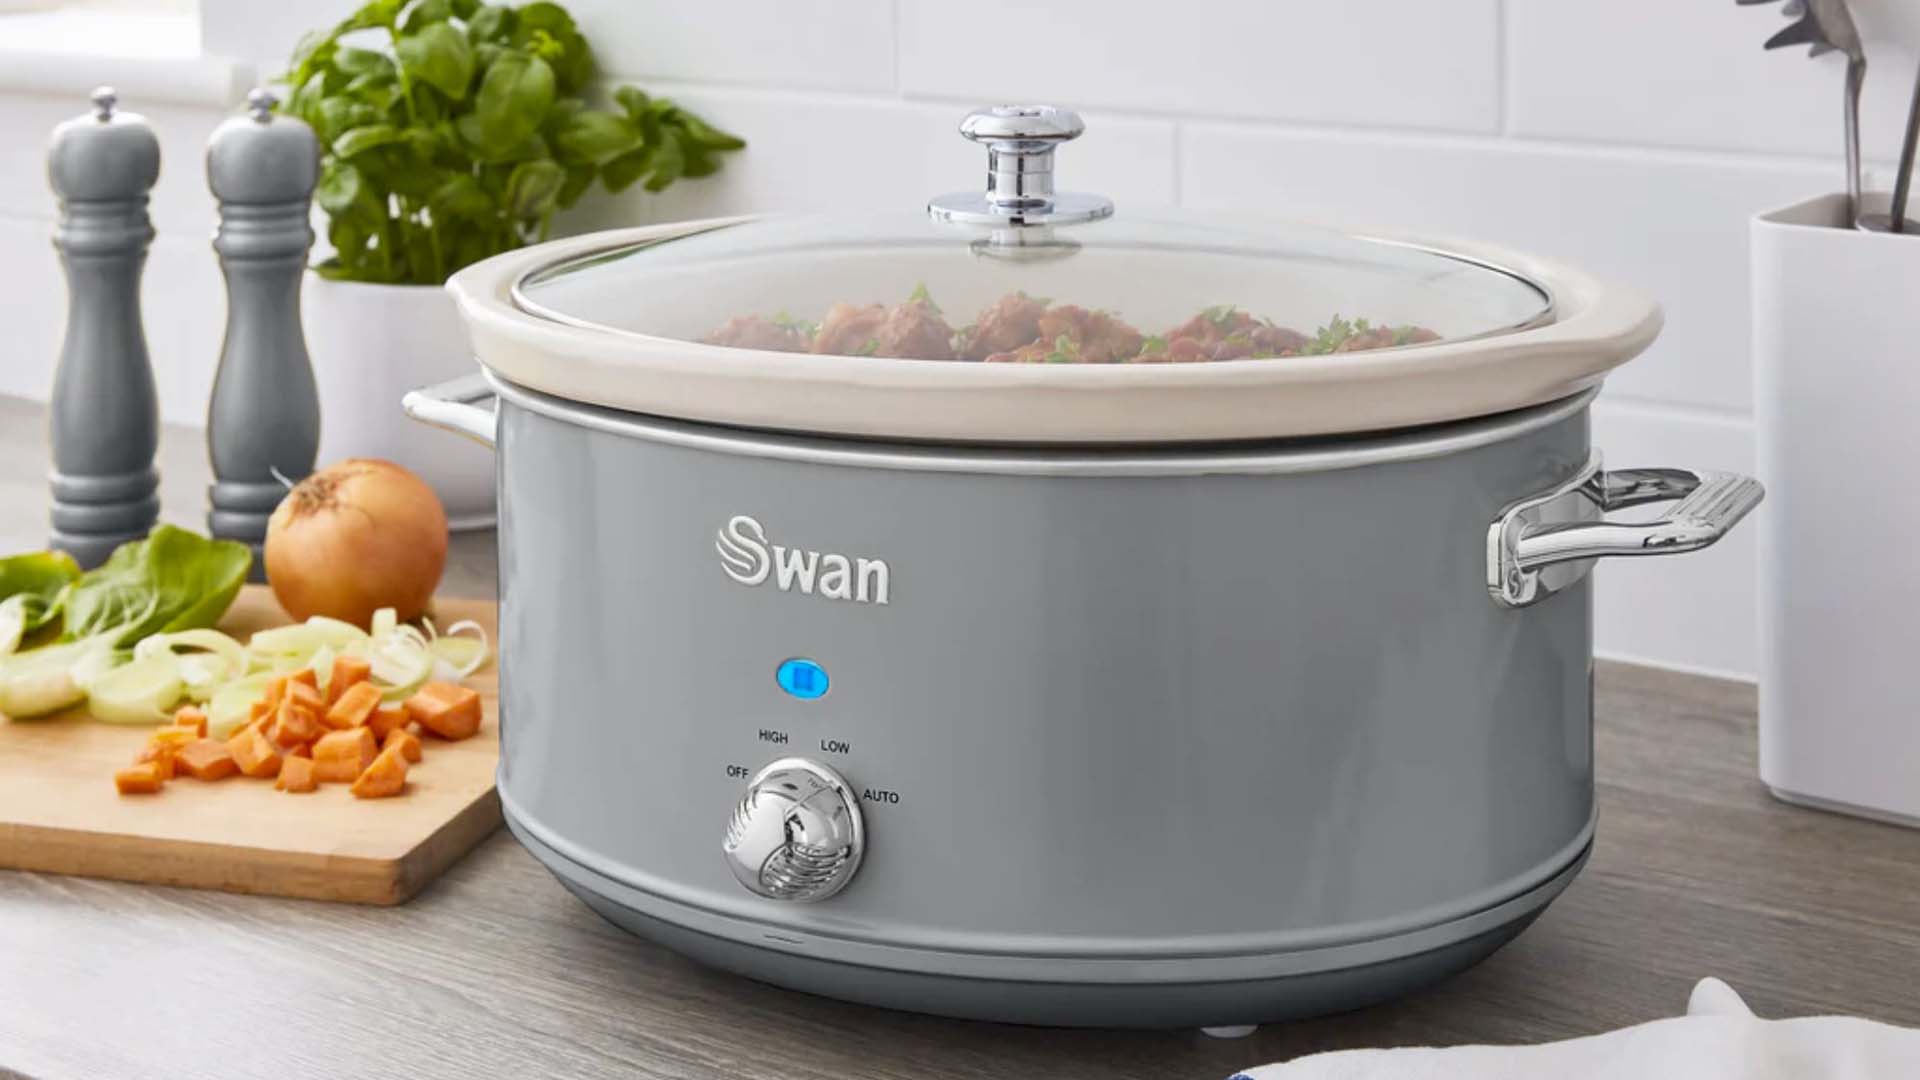 A grey slow cooker on a kitchen counter